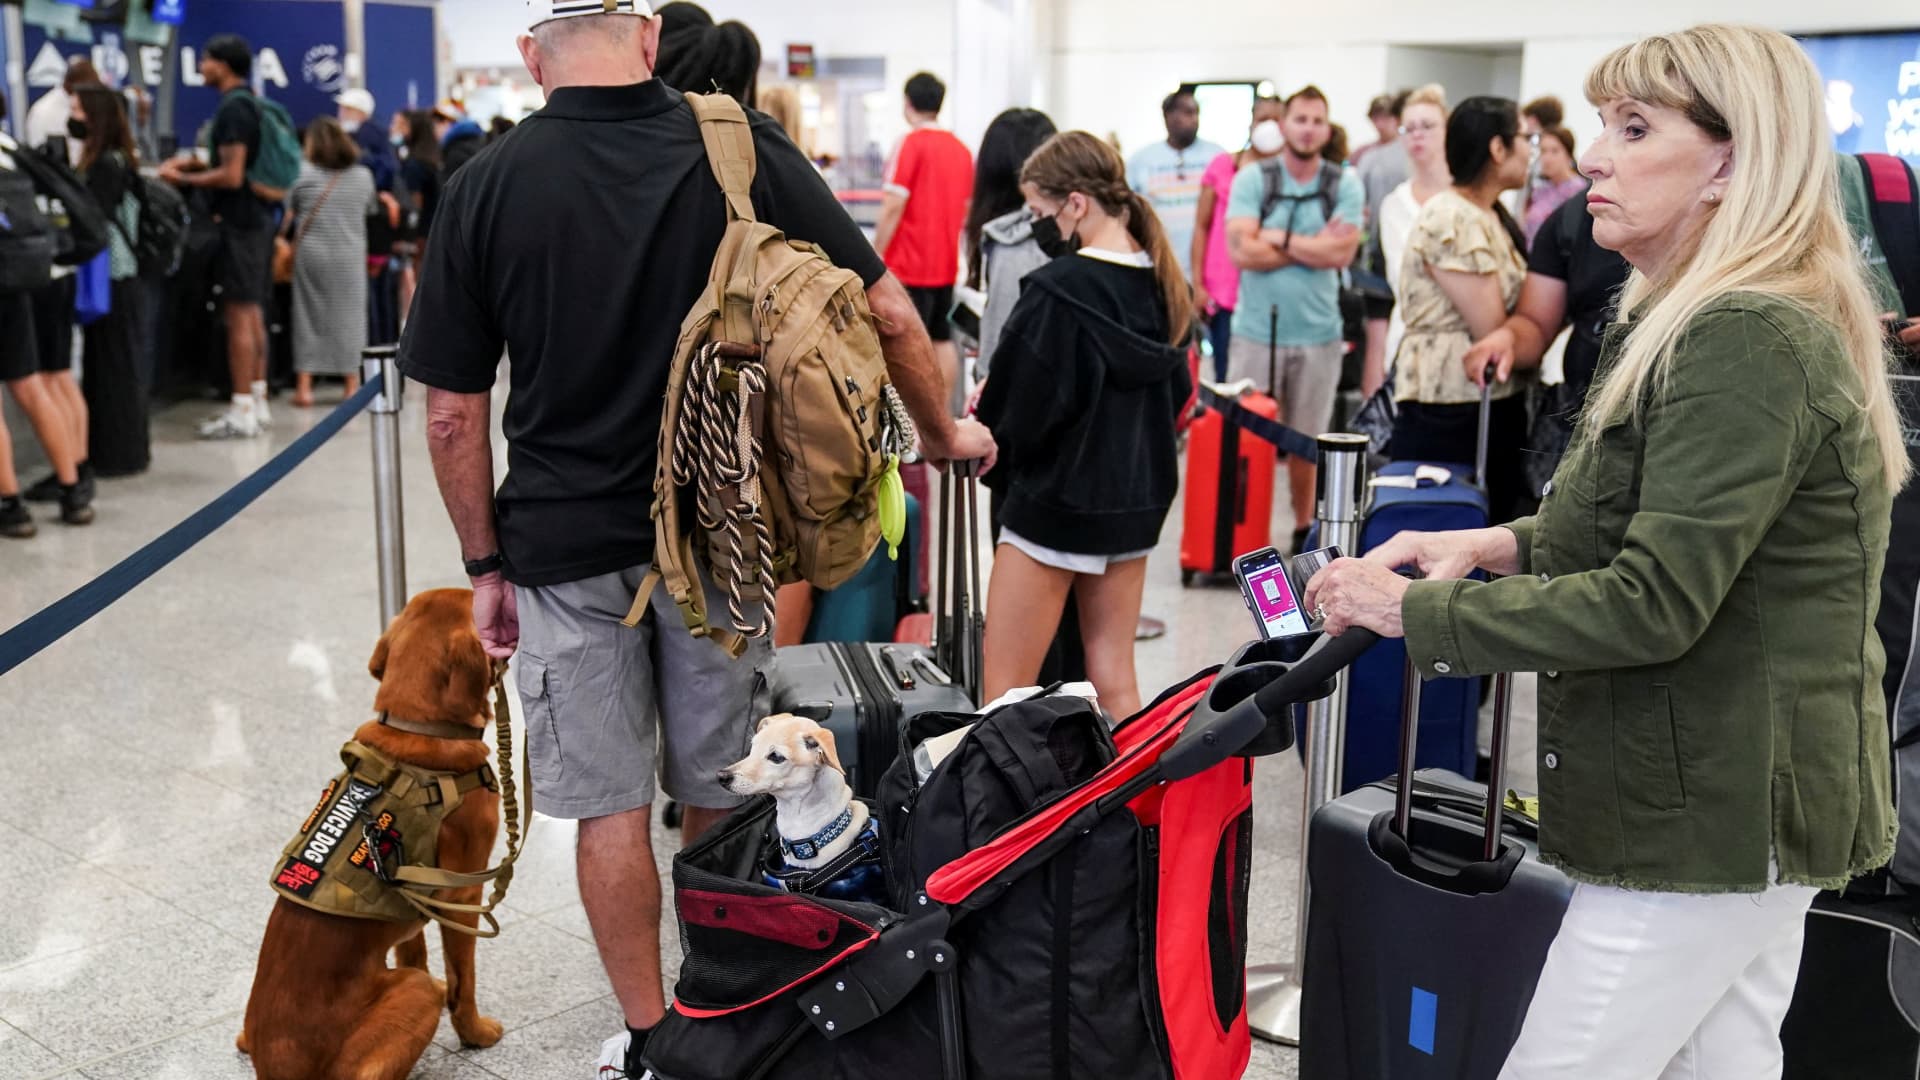 Airfares are finally starting to cool as peak summer travel season fades. Now what?